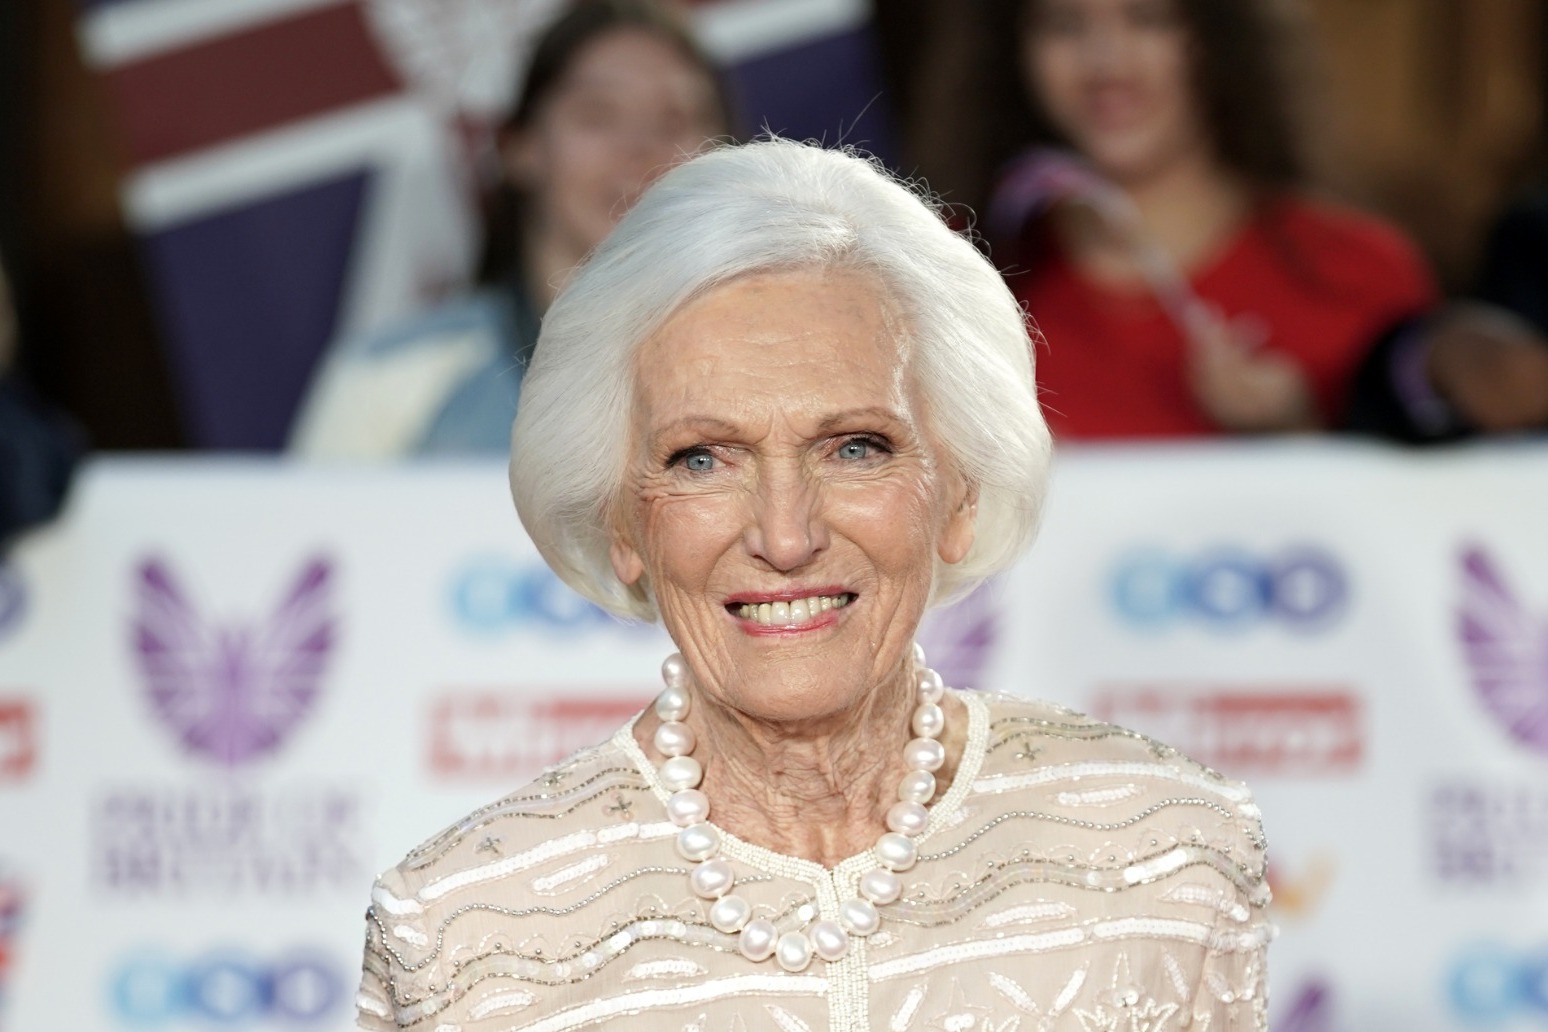 Mary Berry reveals how she uses a sleeping bag during her Christmas meal prep 